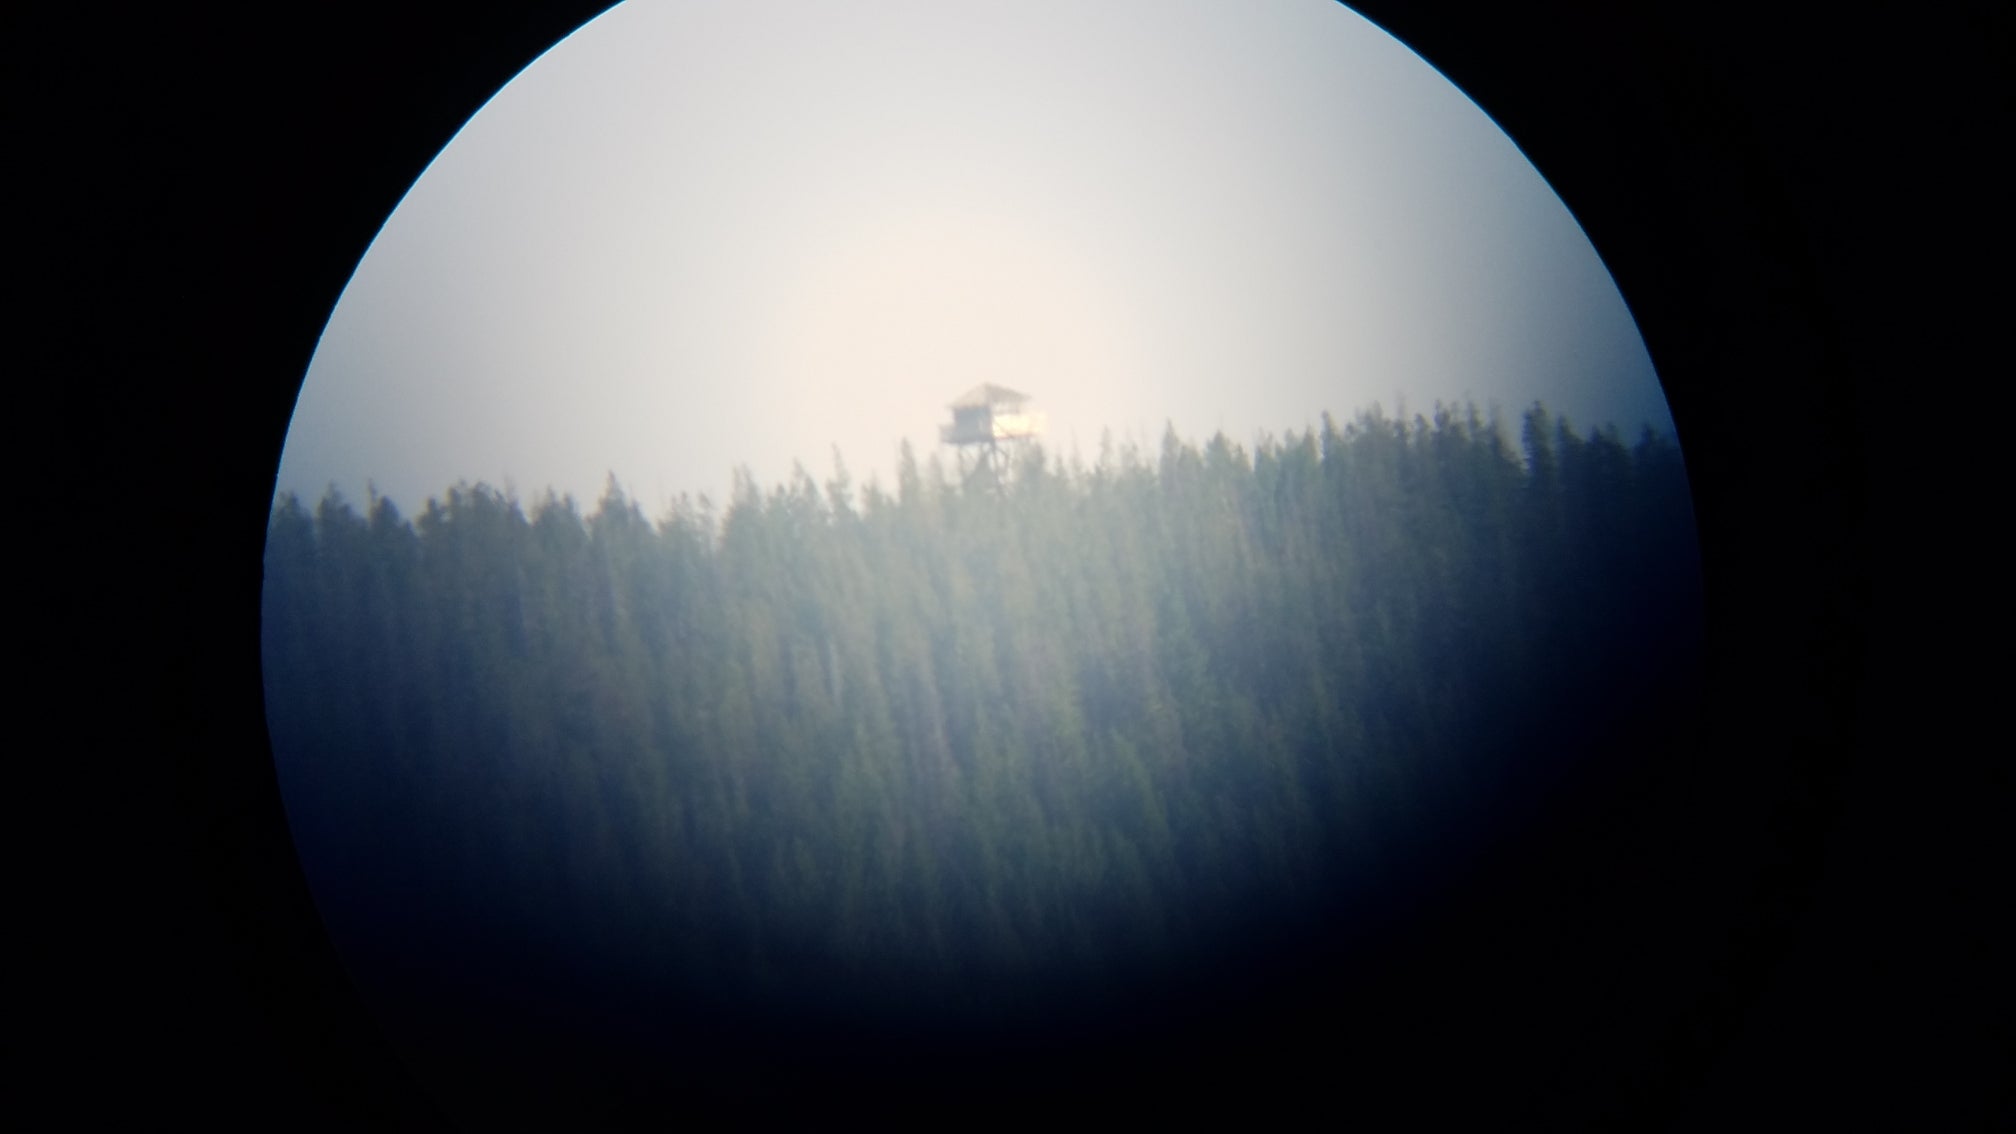 weitas butte lookout viewing with spotting scope from rocky ridge lake campground